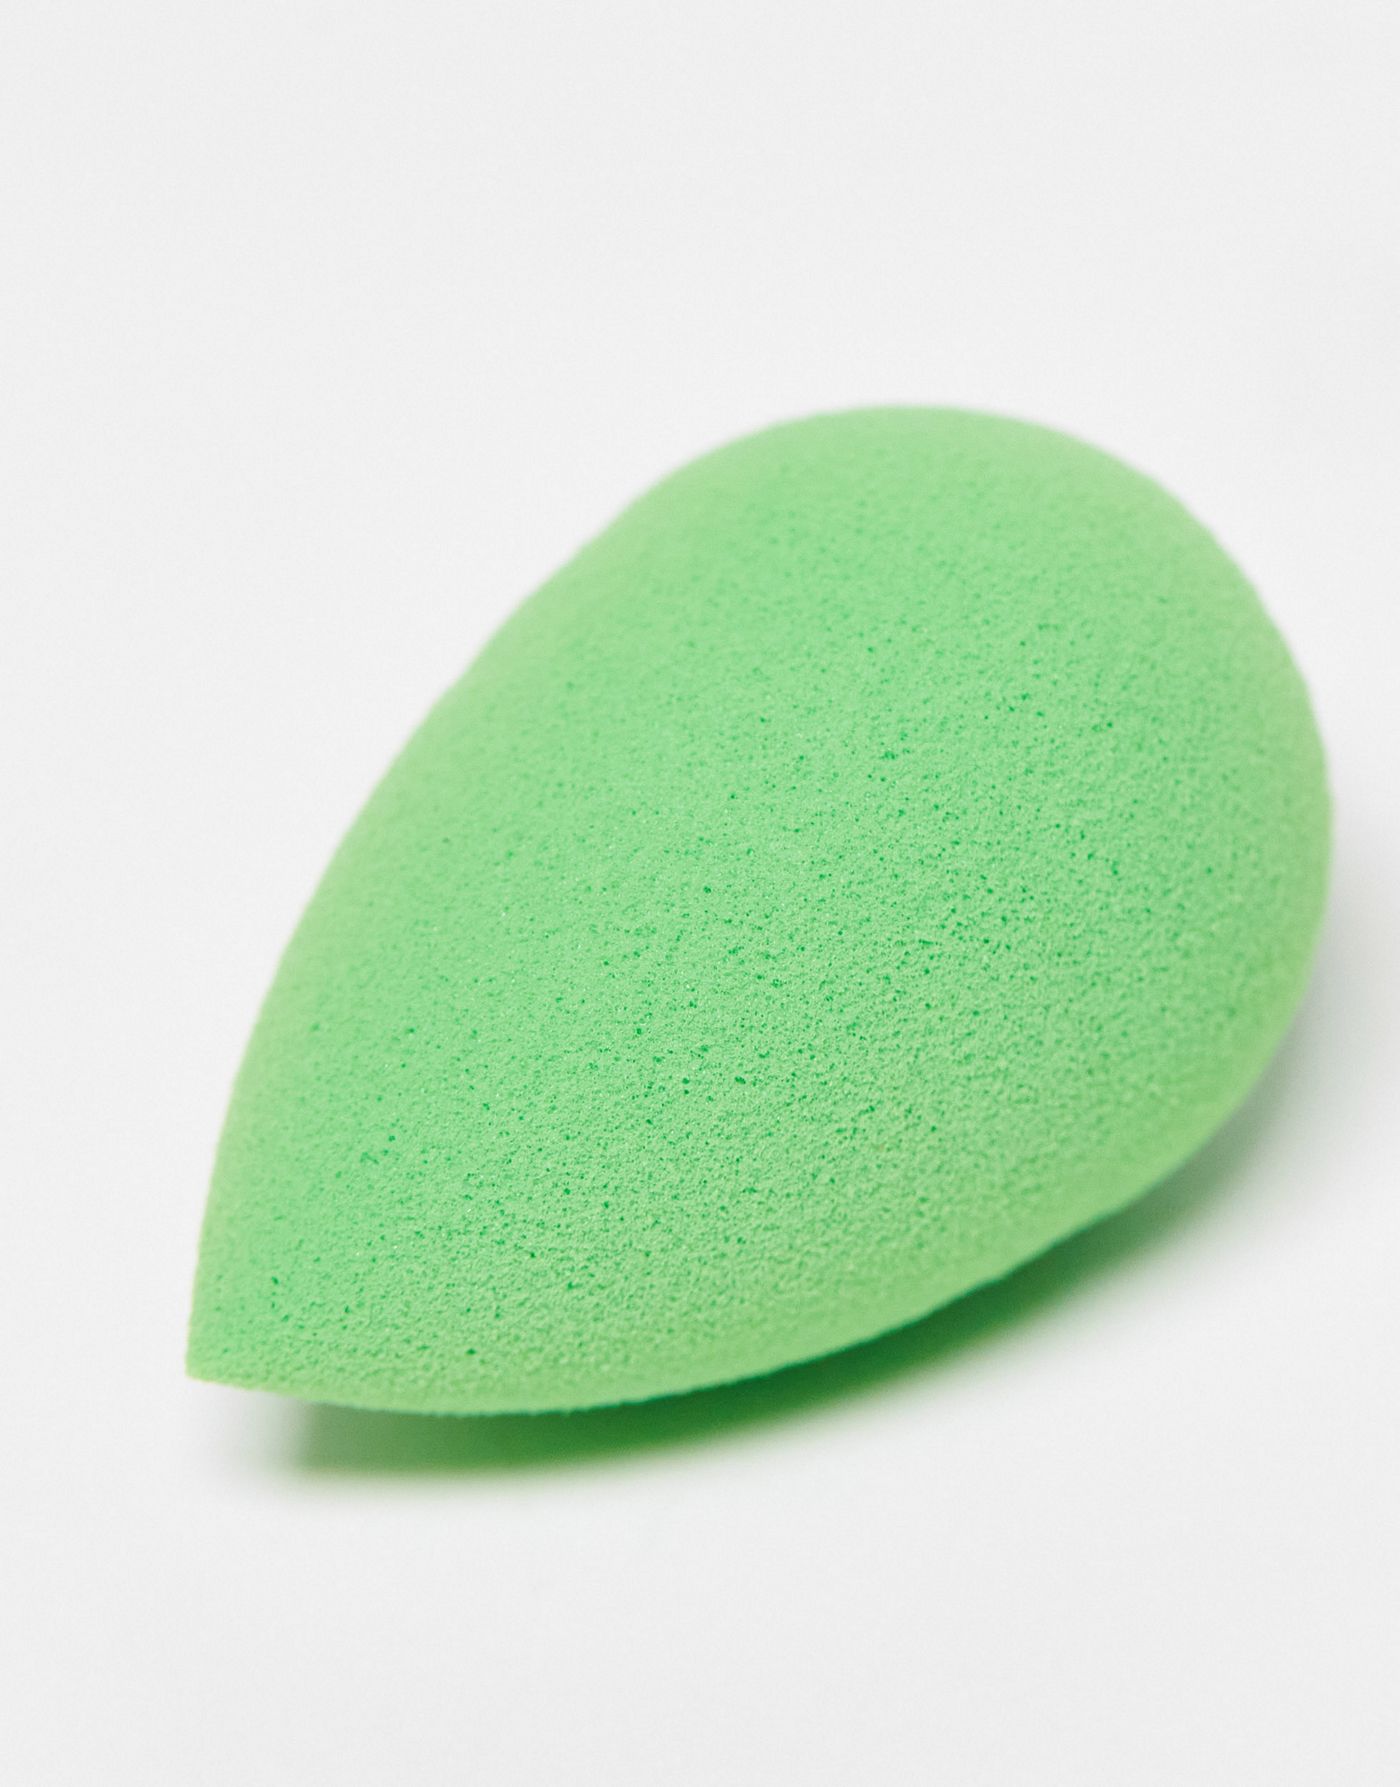 Beautyblender Once Upon A Blend